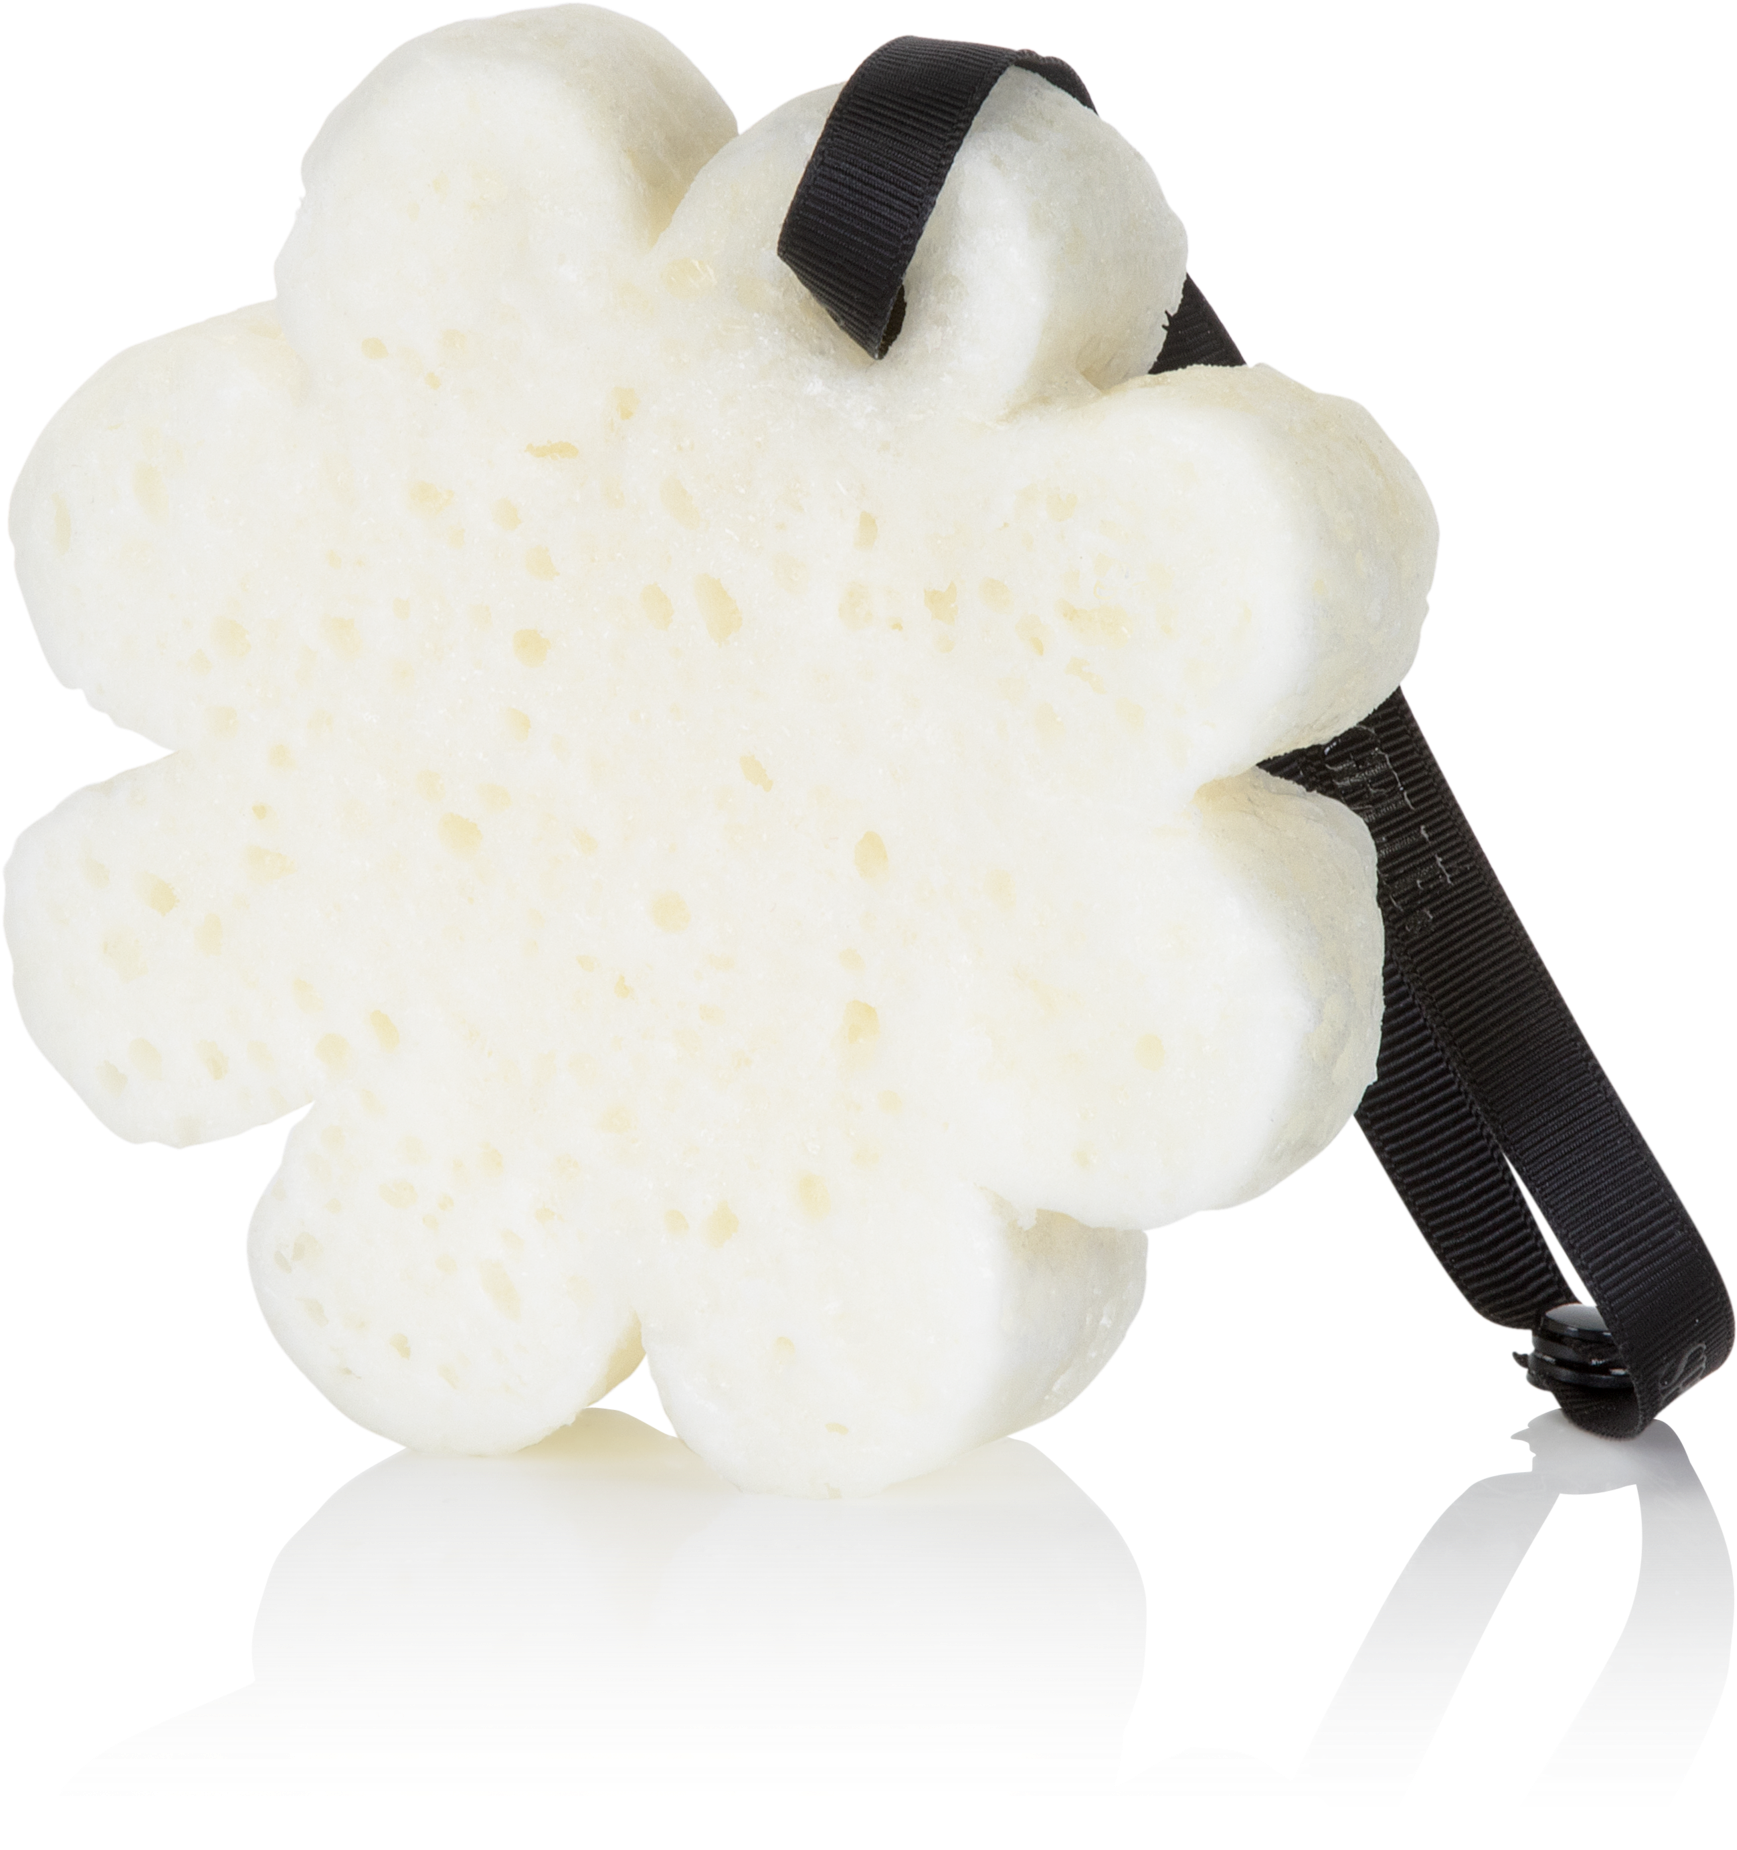 A White Flower Shaped Object With A Black Strap